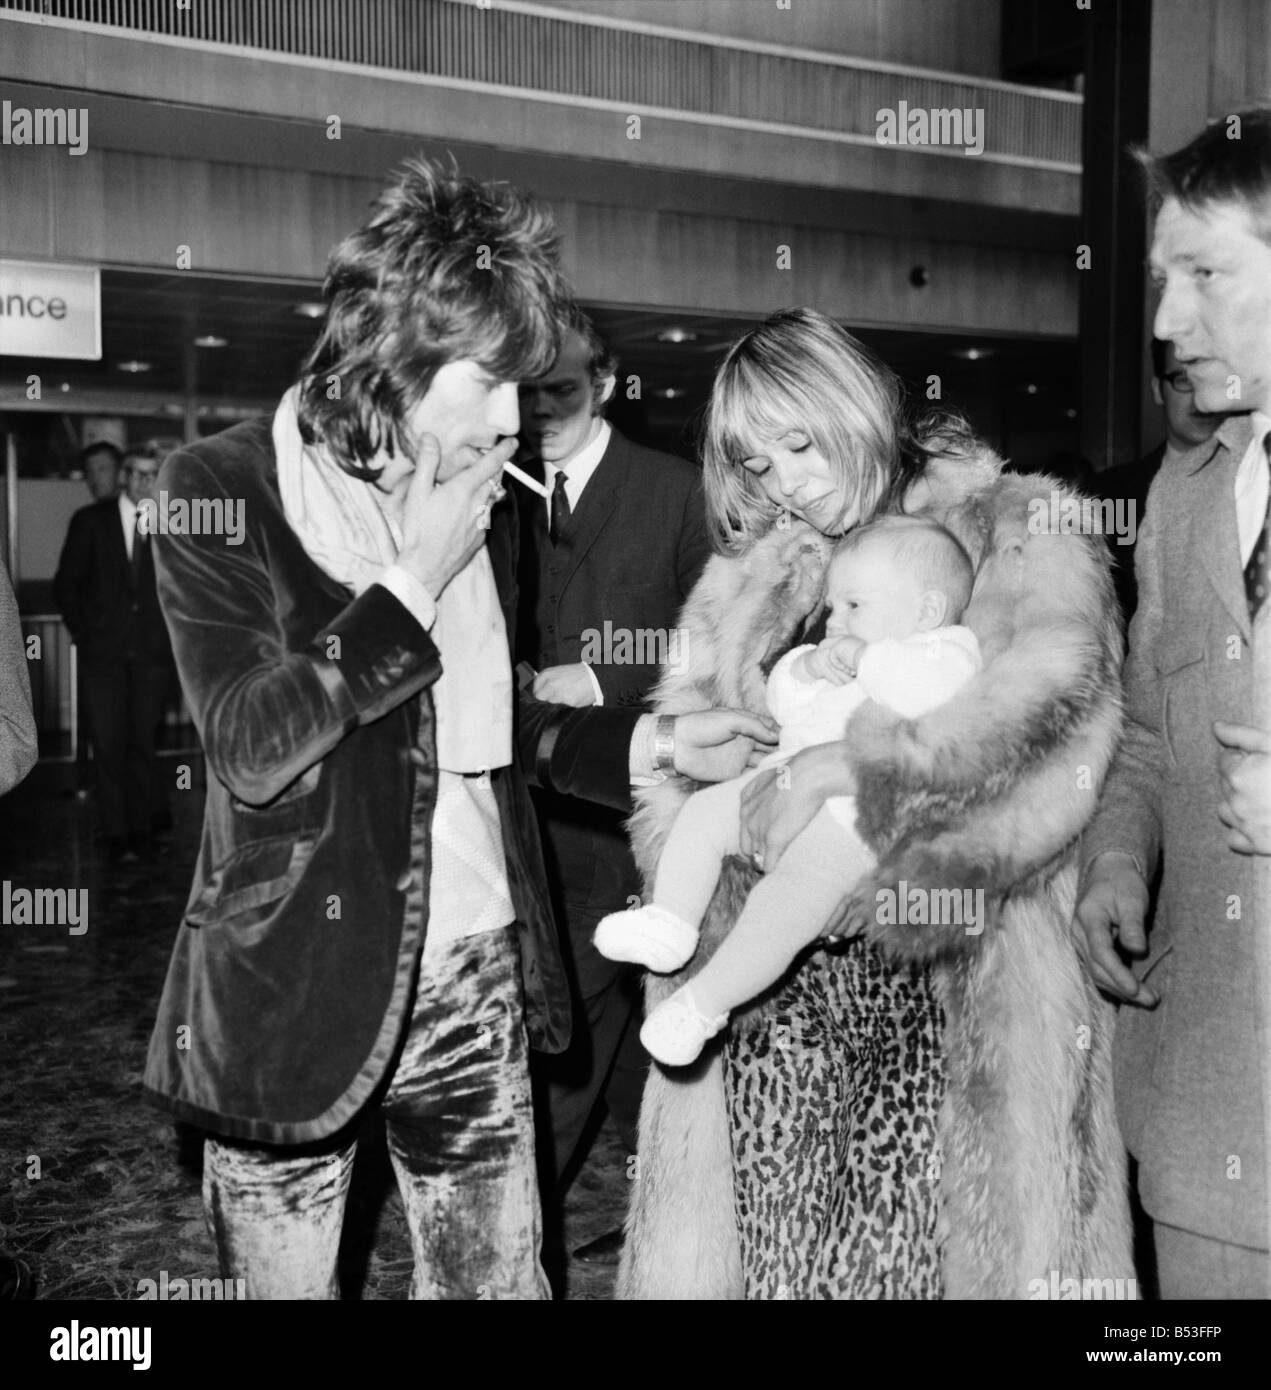 Rolling Stones, Charlie Watts and Keith Richard arrived at Heathrow Airport today from Los Angeles. They were met by Charlie Watts' wife and daughter, and the girlfriend of Keith Richard, Anita Pallenberg with their 4 months old baby Marlon. (left to right) Keith Richard and Charlie Watts pictured at Heathrow Airport . December 1969 Z11832-001 Stock Photo